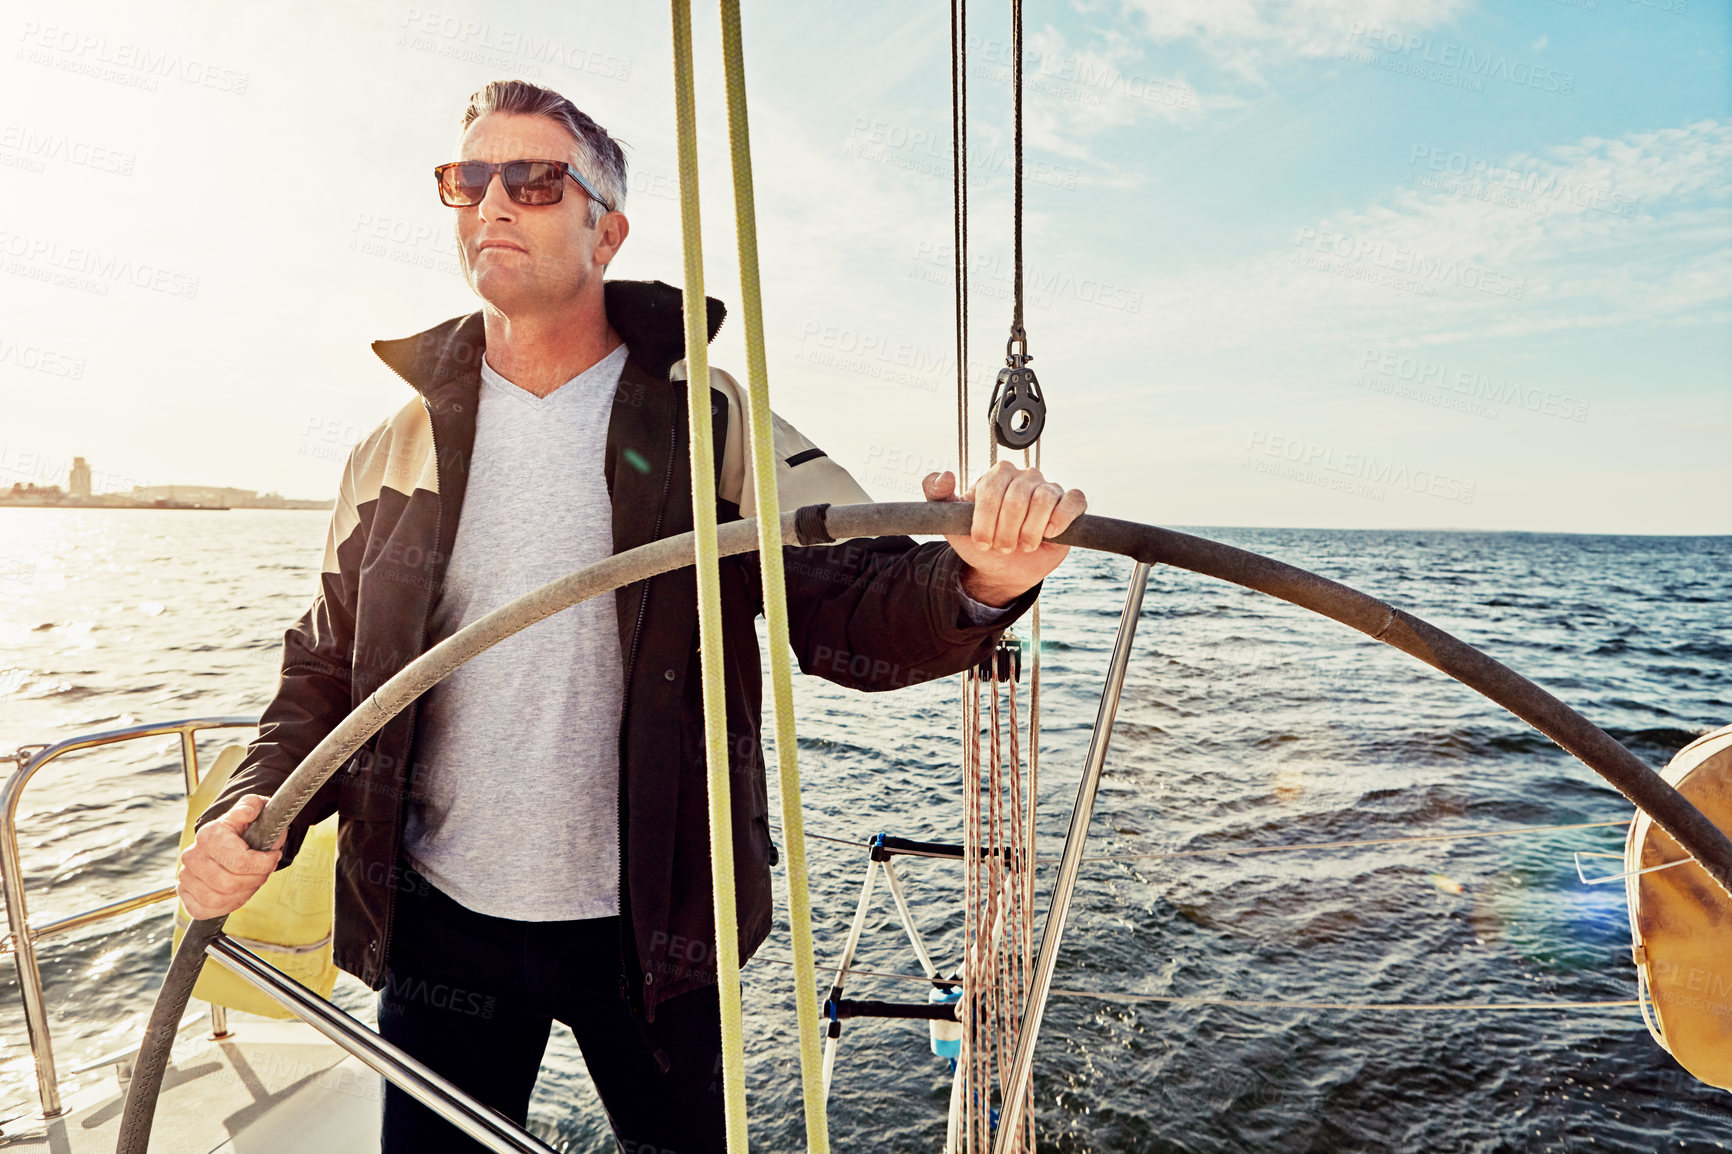 Buy stock photo Shot of a man out on a boat trip alone